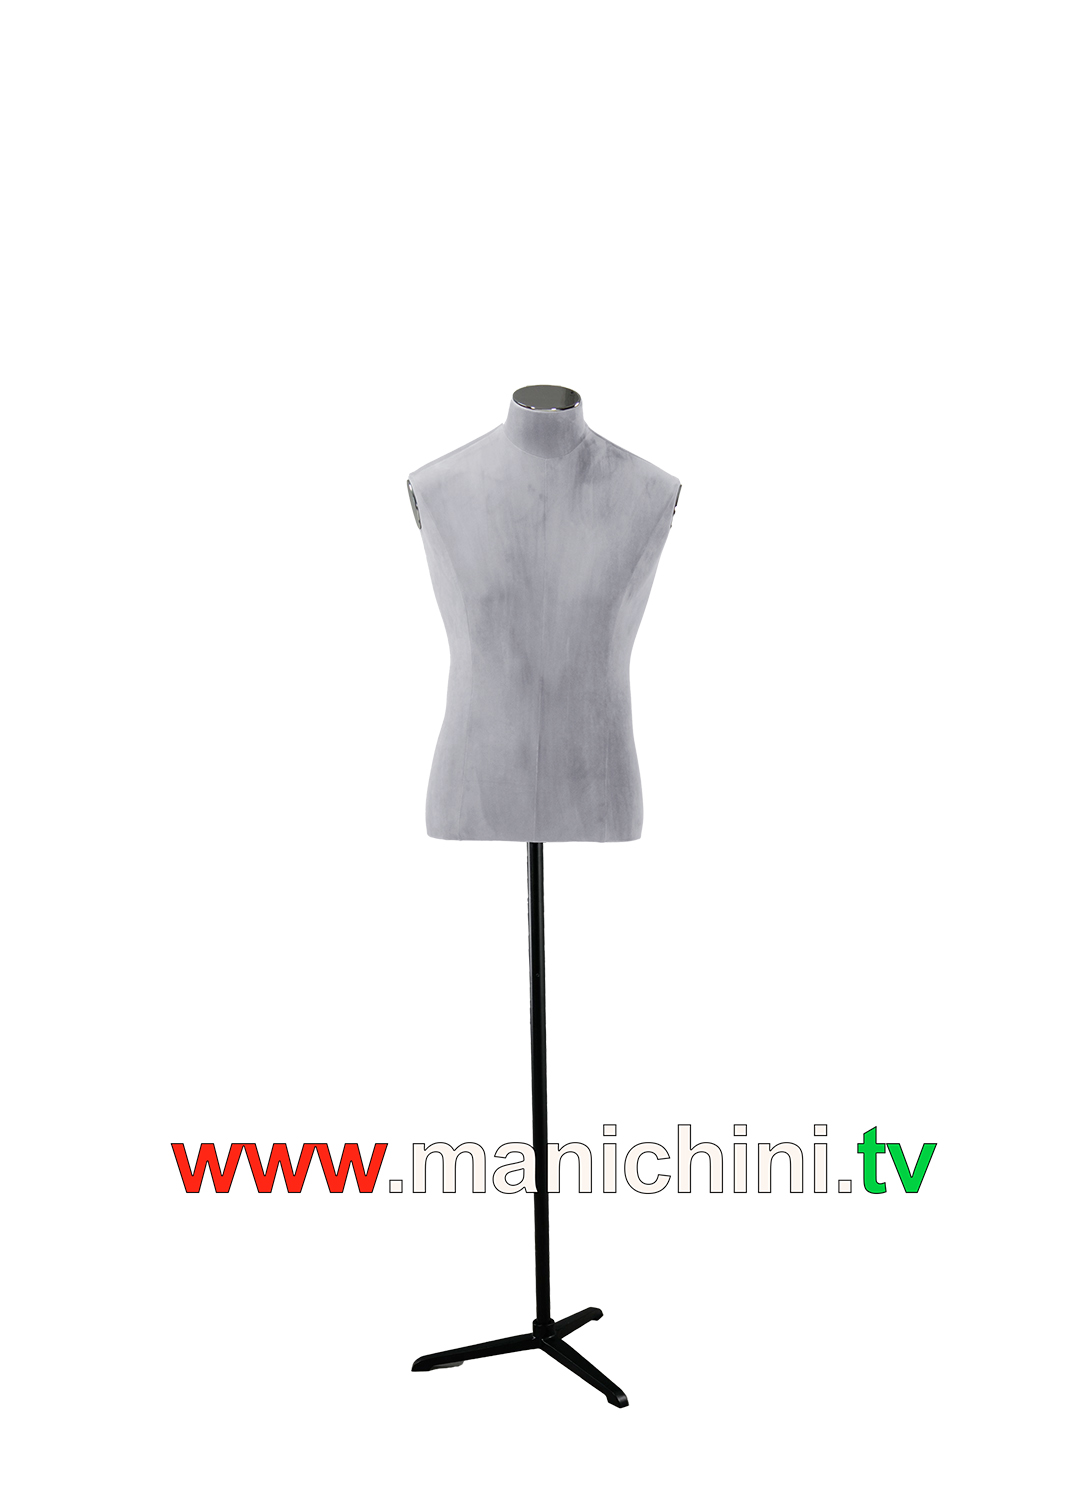 Velvet upholstered busts Dark grey tailored woman bust in wood